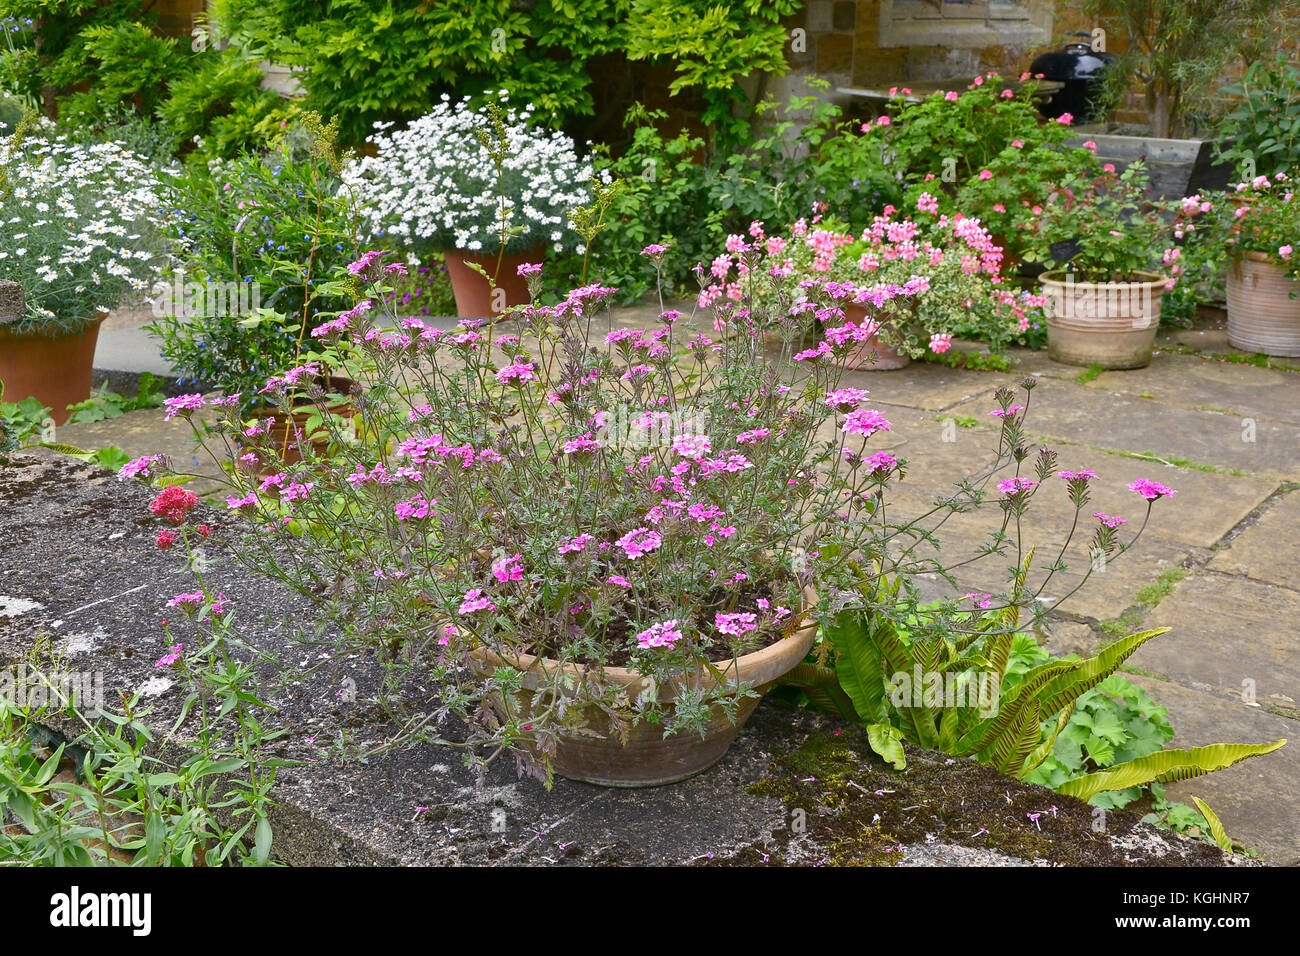 Garden Container With Flowering Verbena Sissinghurst Pink On A